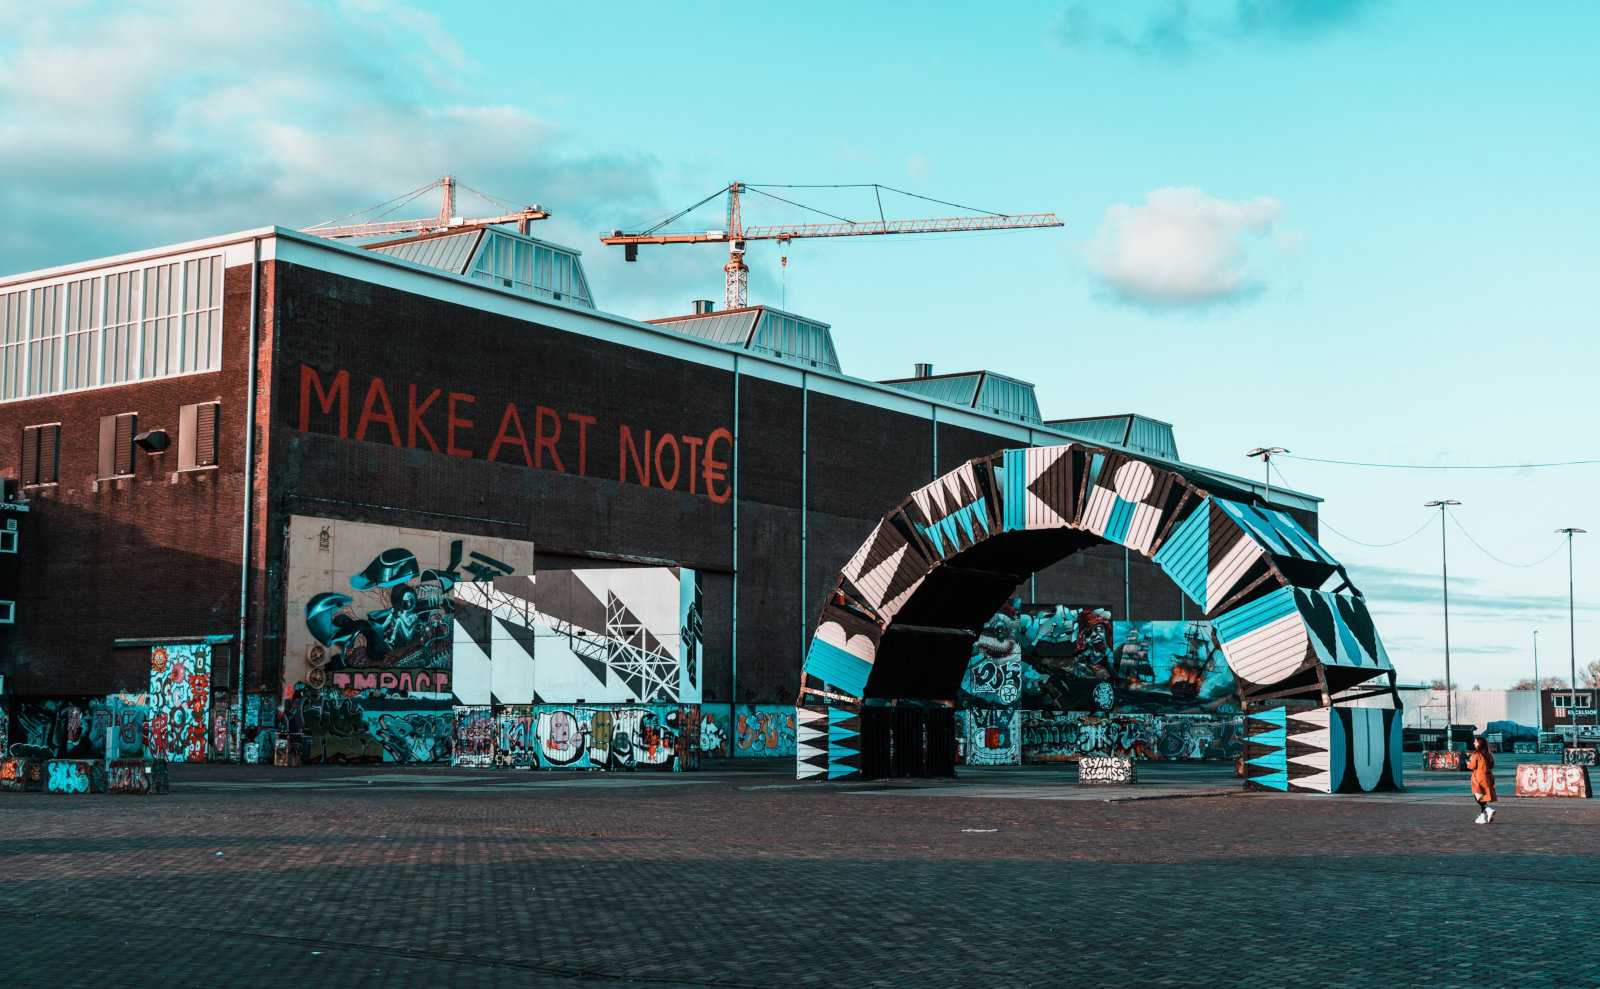 The Complete Guide to Visiting NDSM-Werf in Amsterdam: What to Do, Where to Eat and Where to Stay!